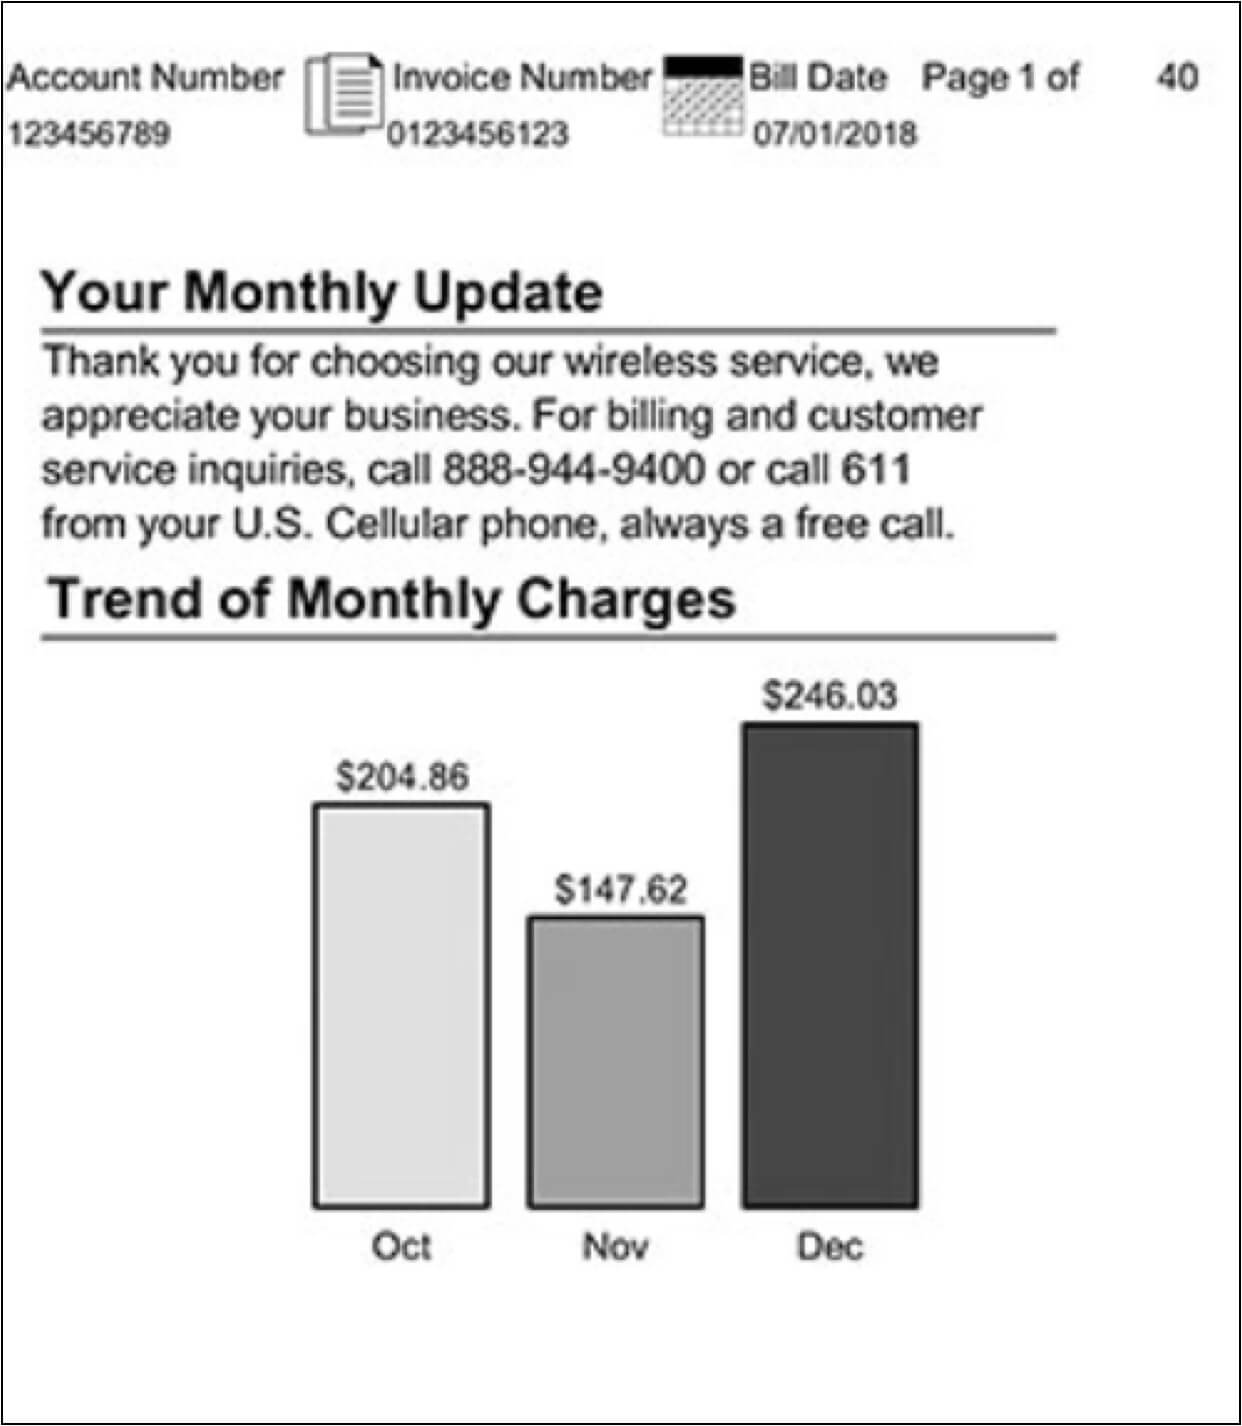 Bill date and trends of monthly charges